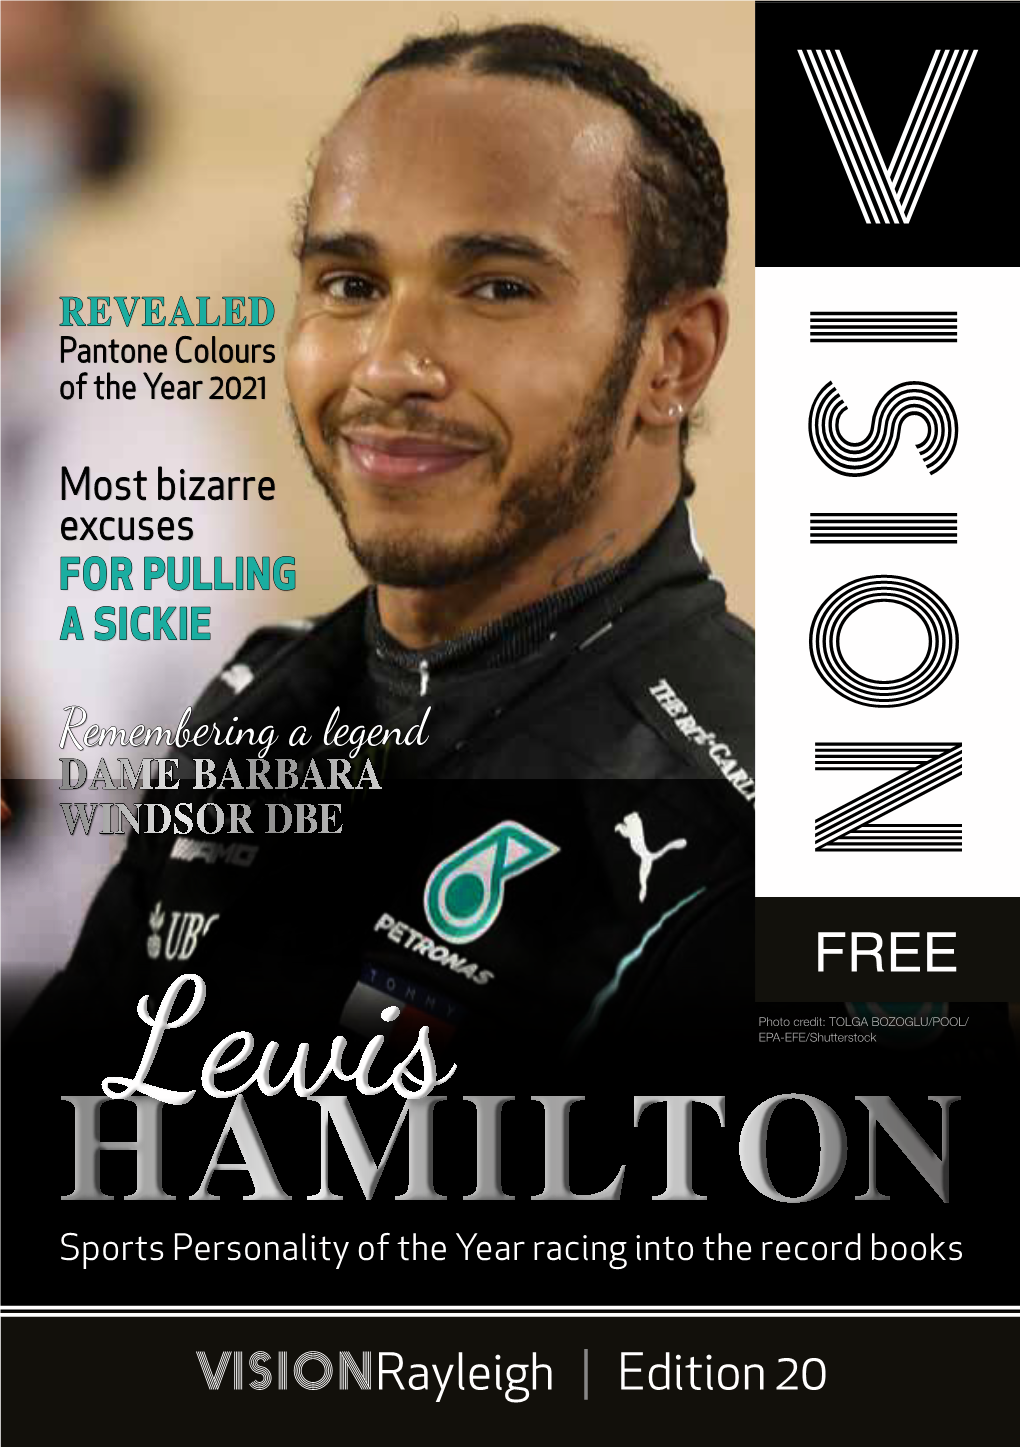 HAMILTON Sports Personality of the Year Racing Into the Record Books